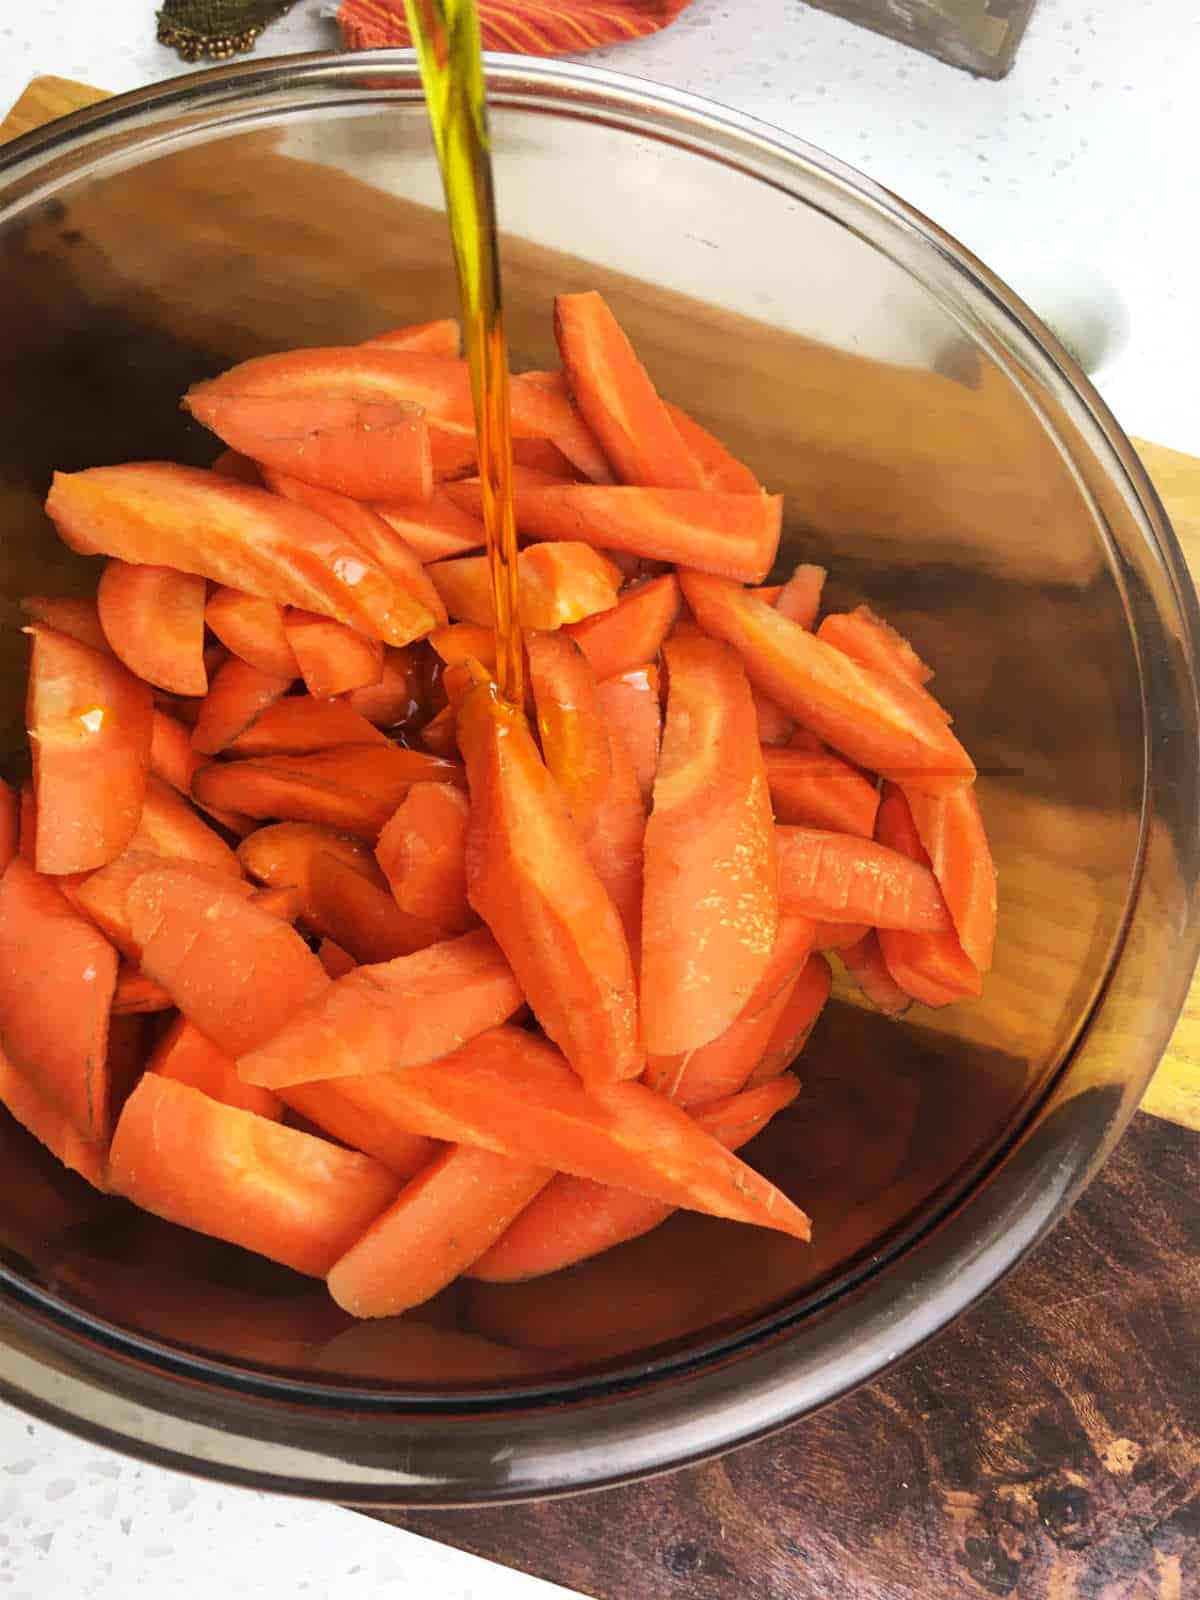 Adding oil to a bowl of cut carrots.